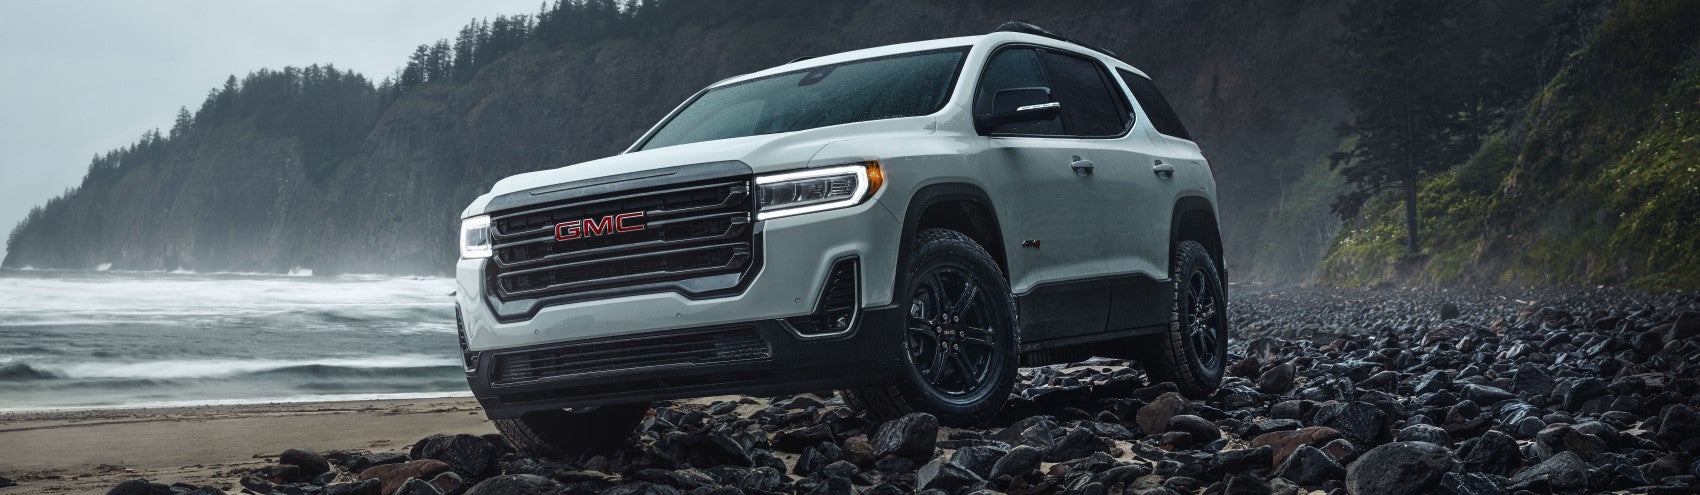 GMC Lease Deals Fishers IN